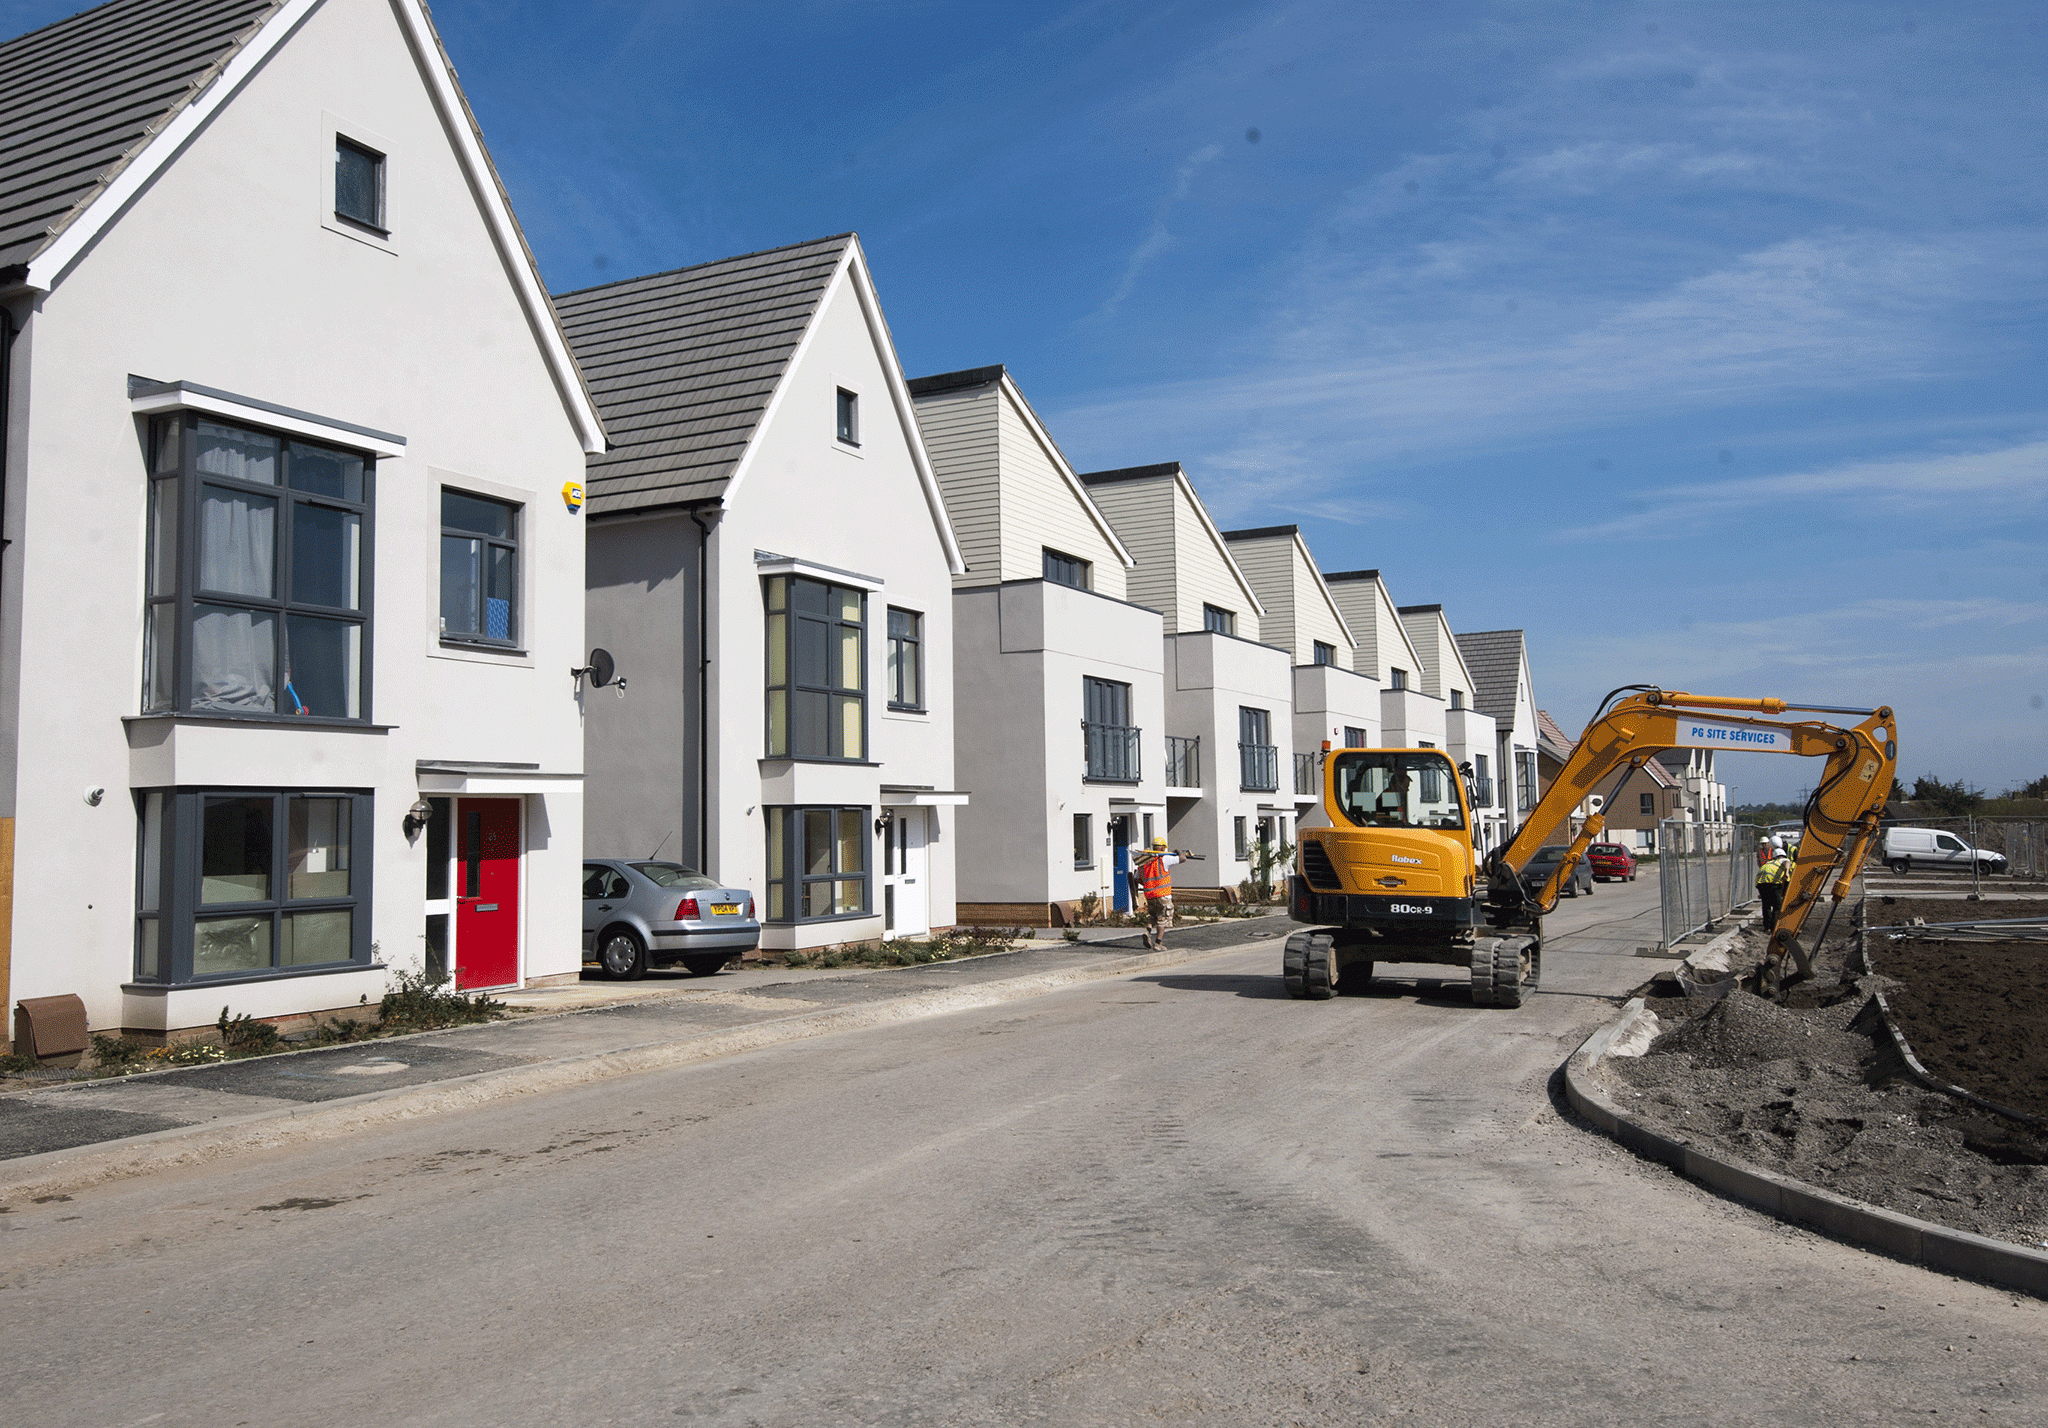 The Help to Buy scheme has helped juice the price of new Persimmon Homes like these 